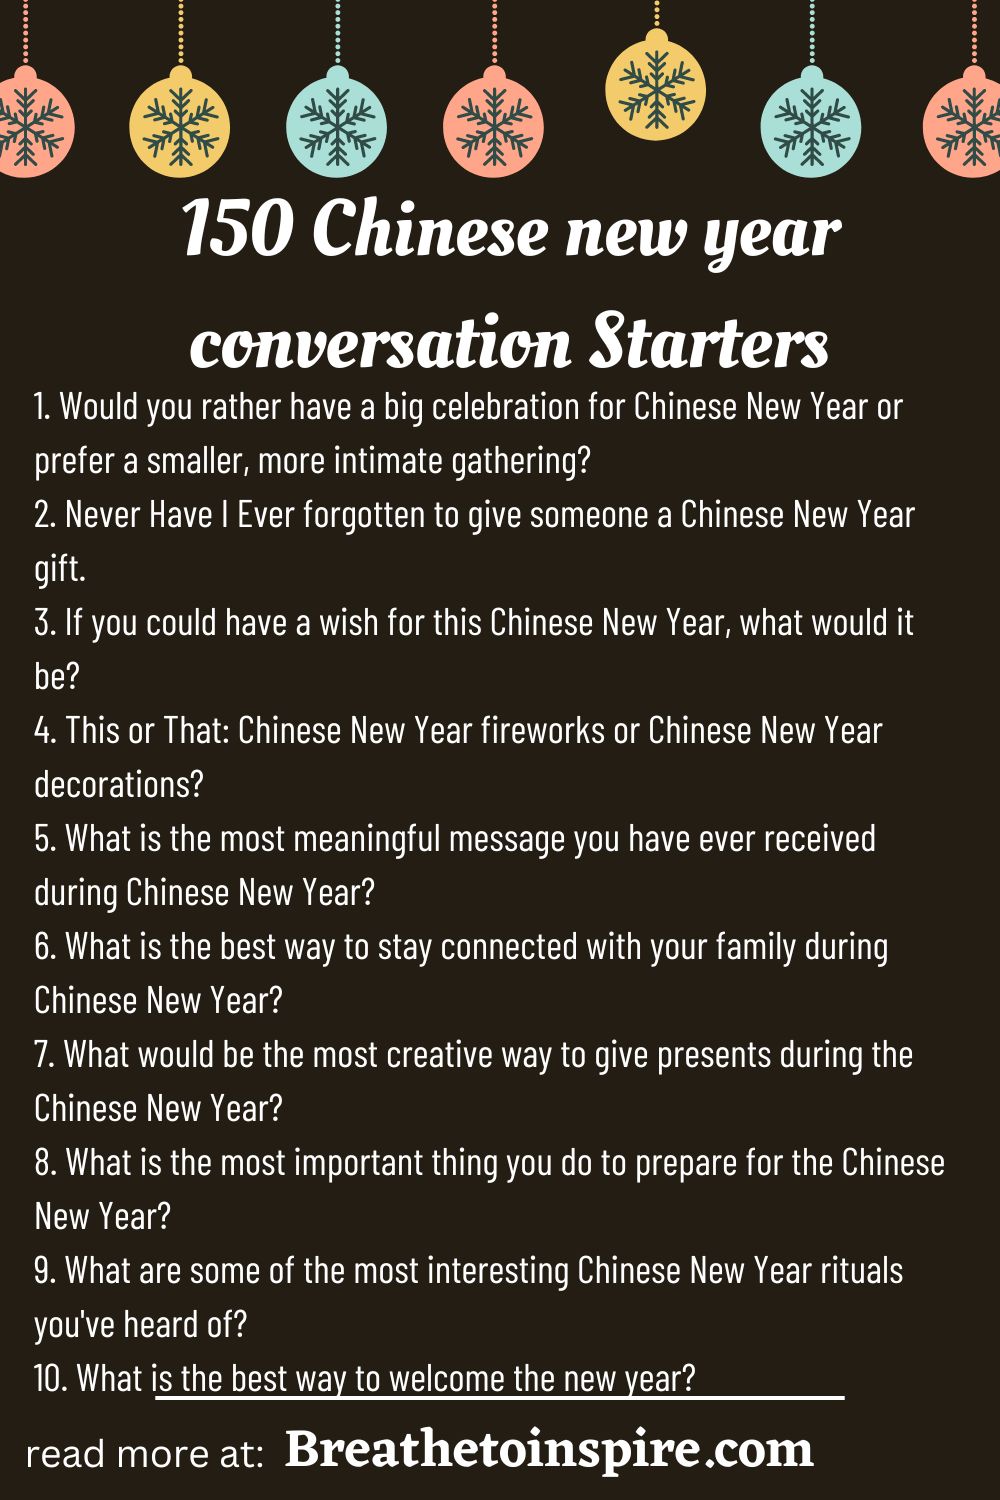 150 Chinese New Year Questions To Ask As Icebreakers And Conversation